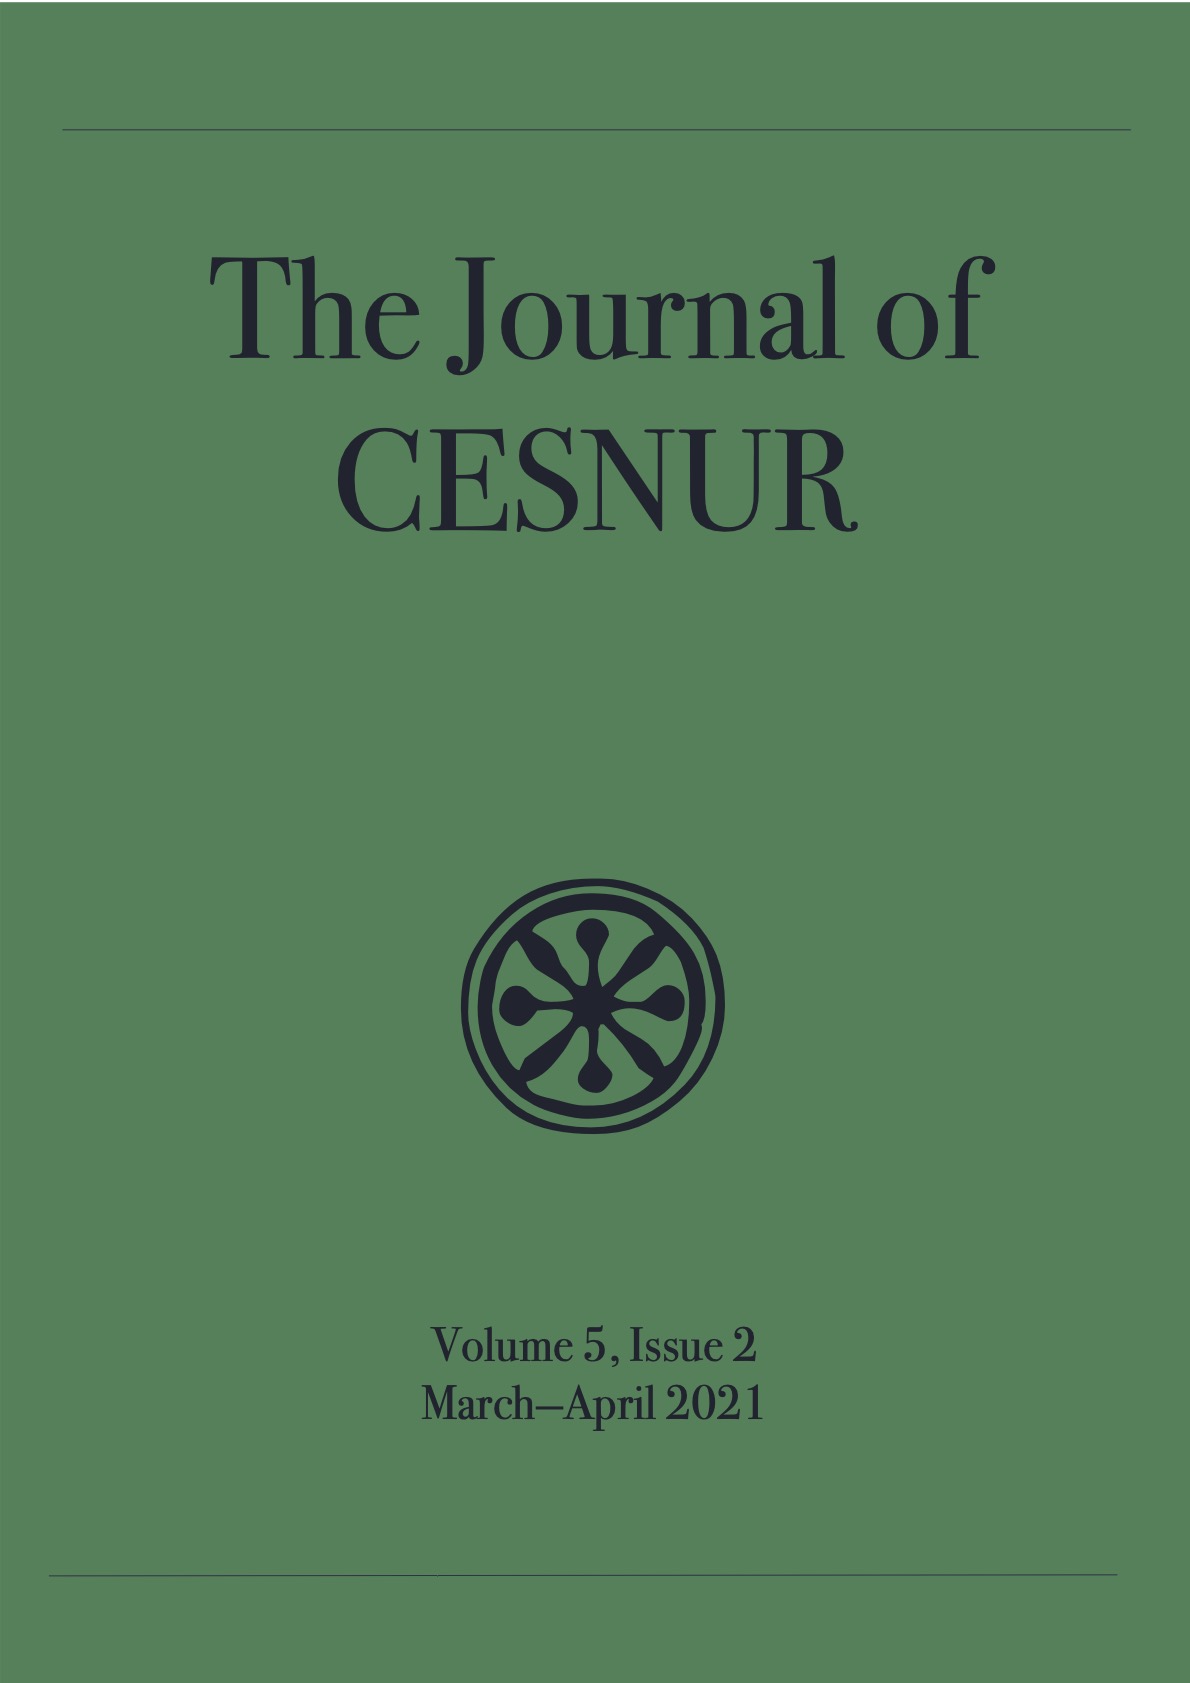 The Journal of Cesnur-Volume 5, issue 2